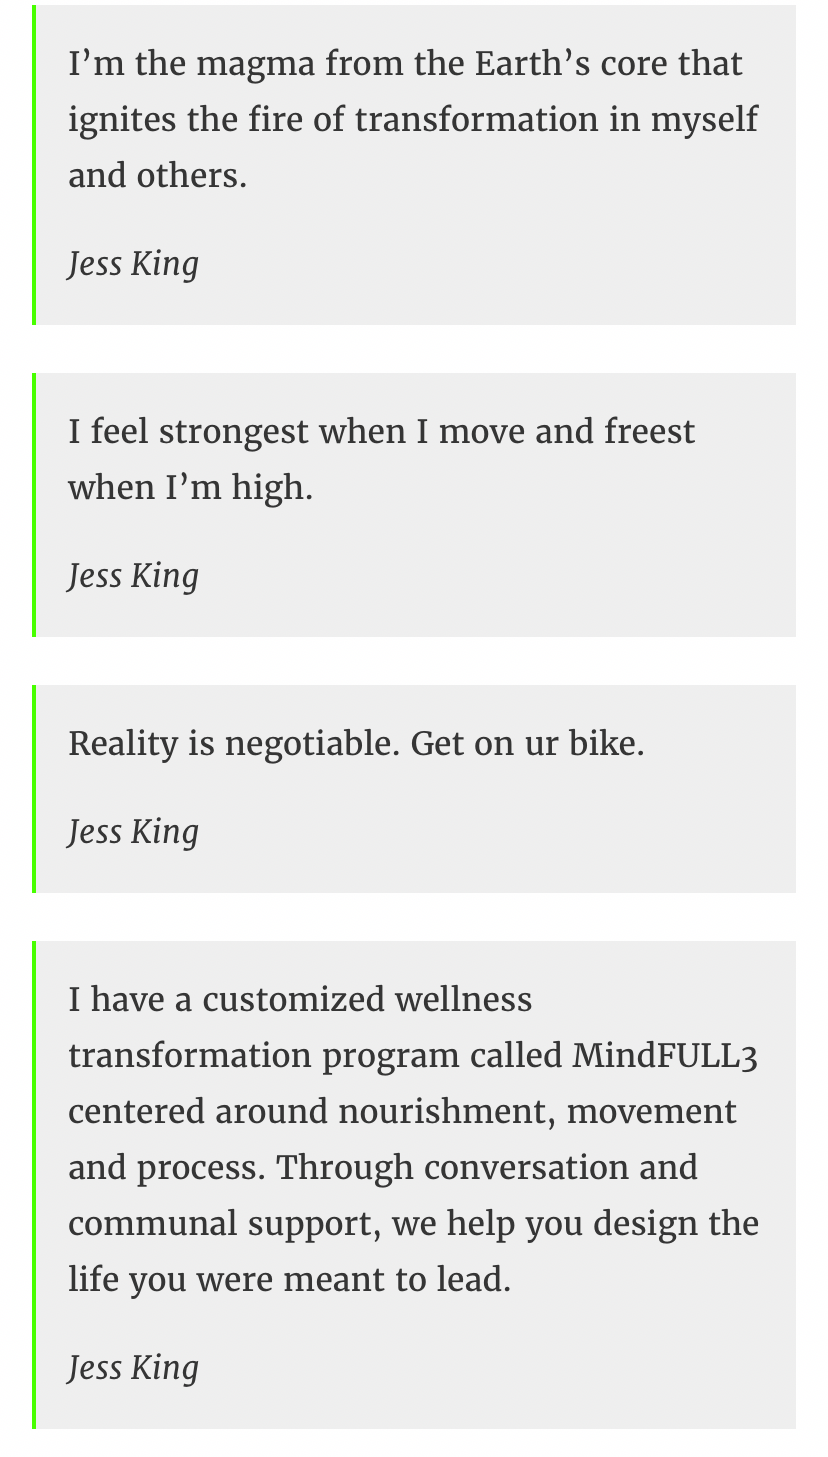 High Quality Jess King Peloton quotes Blank Meme Template